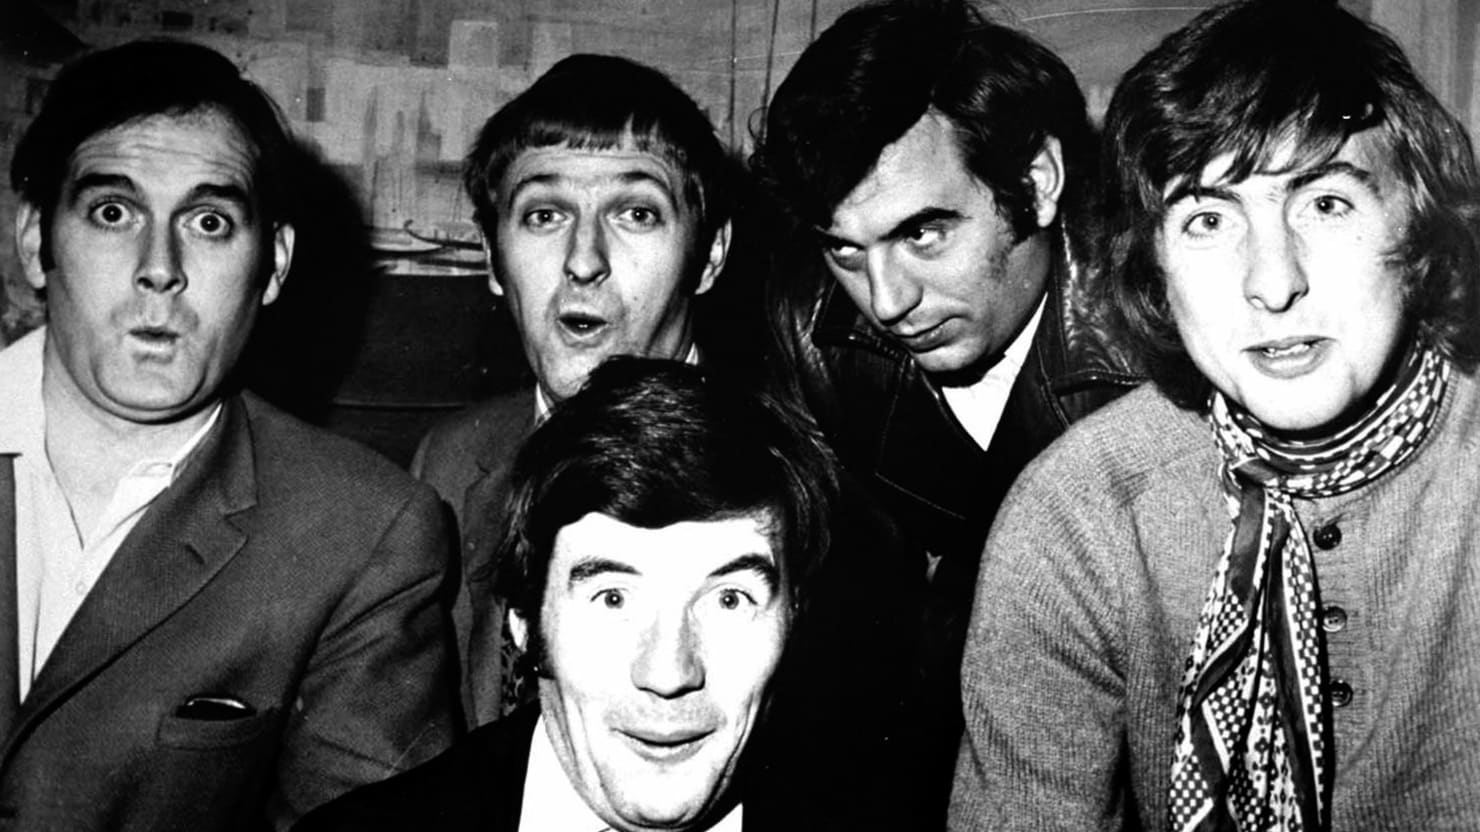 The Funniest Joke In The World - Monty Python's Flying Circus on